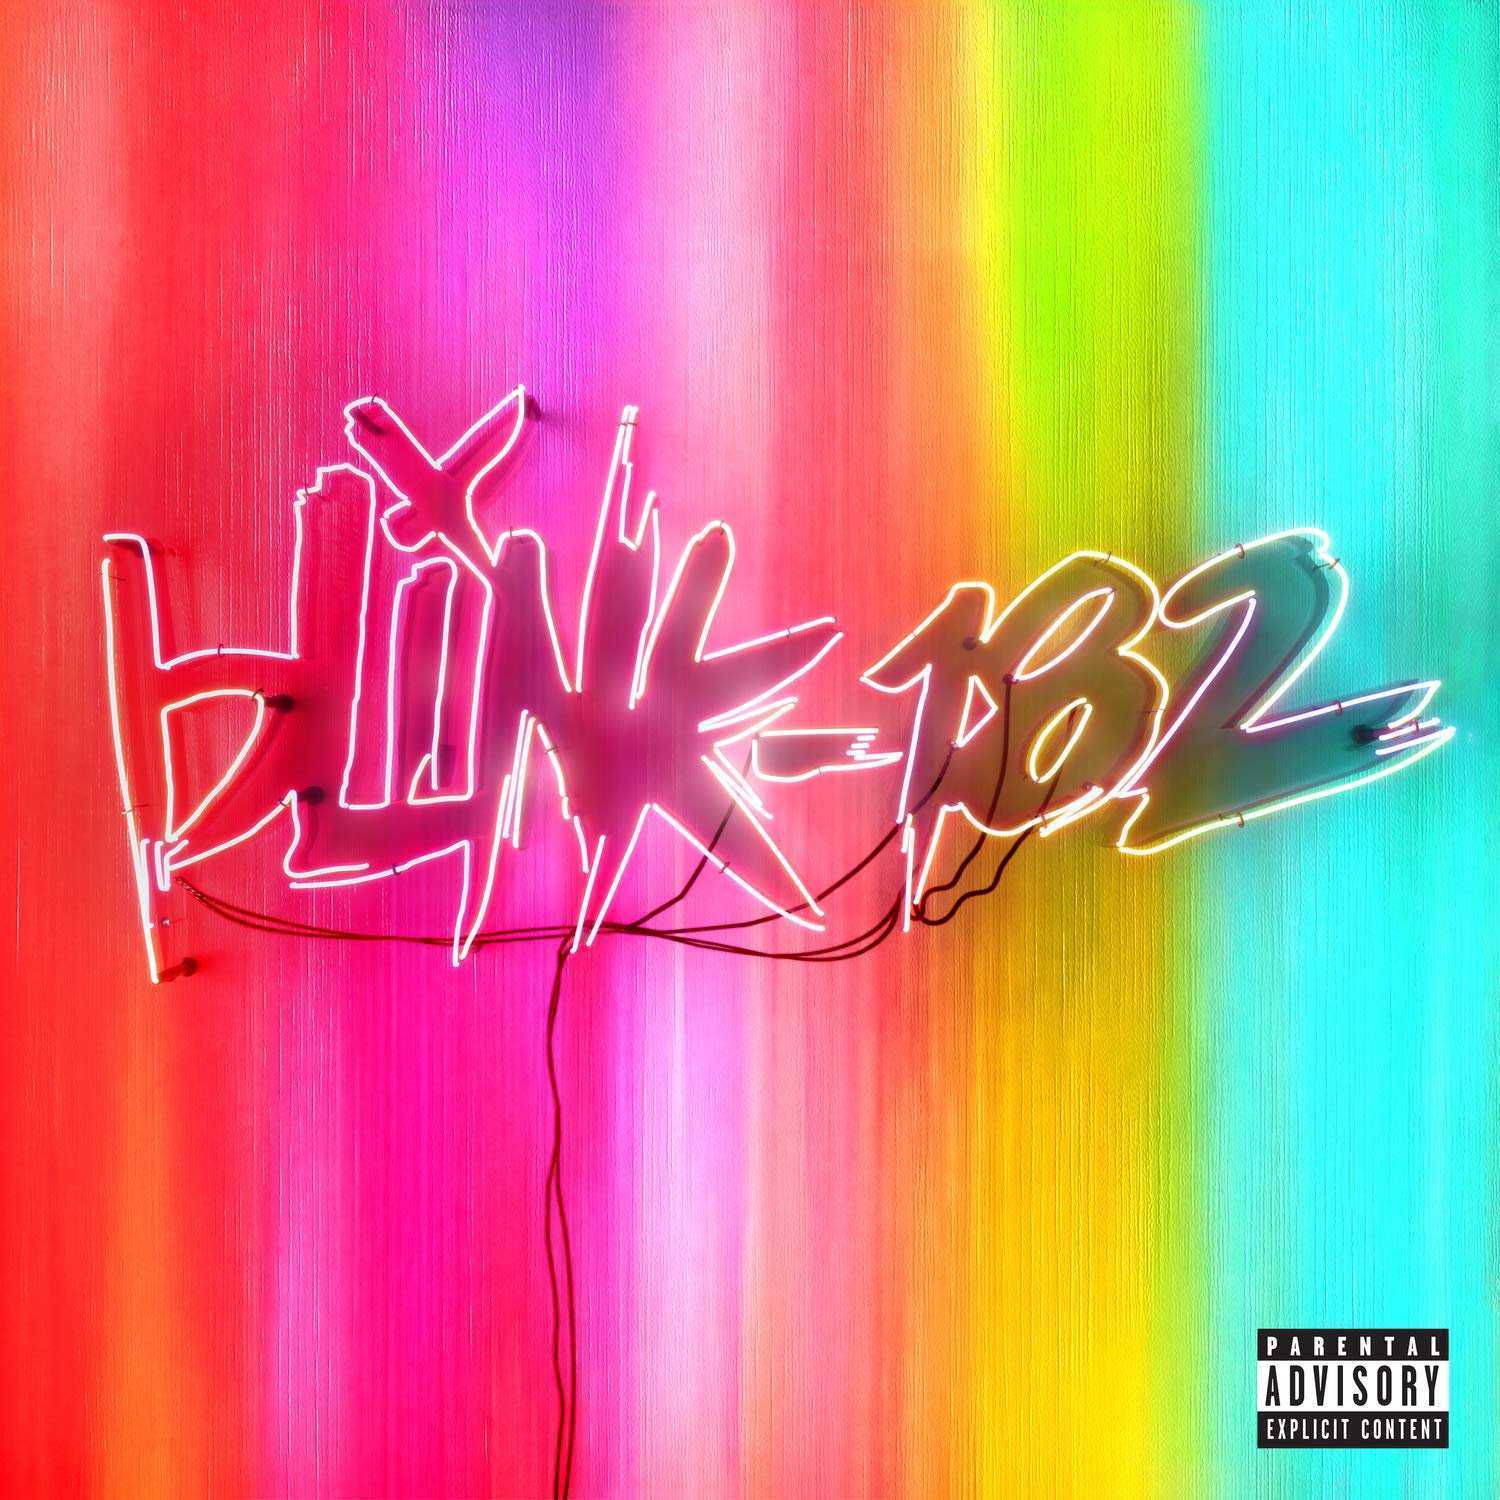 PREORDER NEW BLINK 182 ALBUM "NINE" IN THE PHILIPPINES